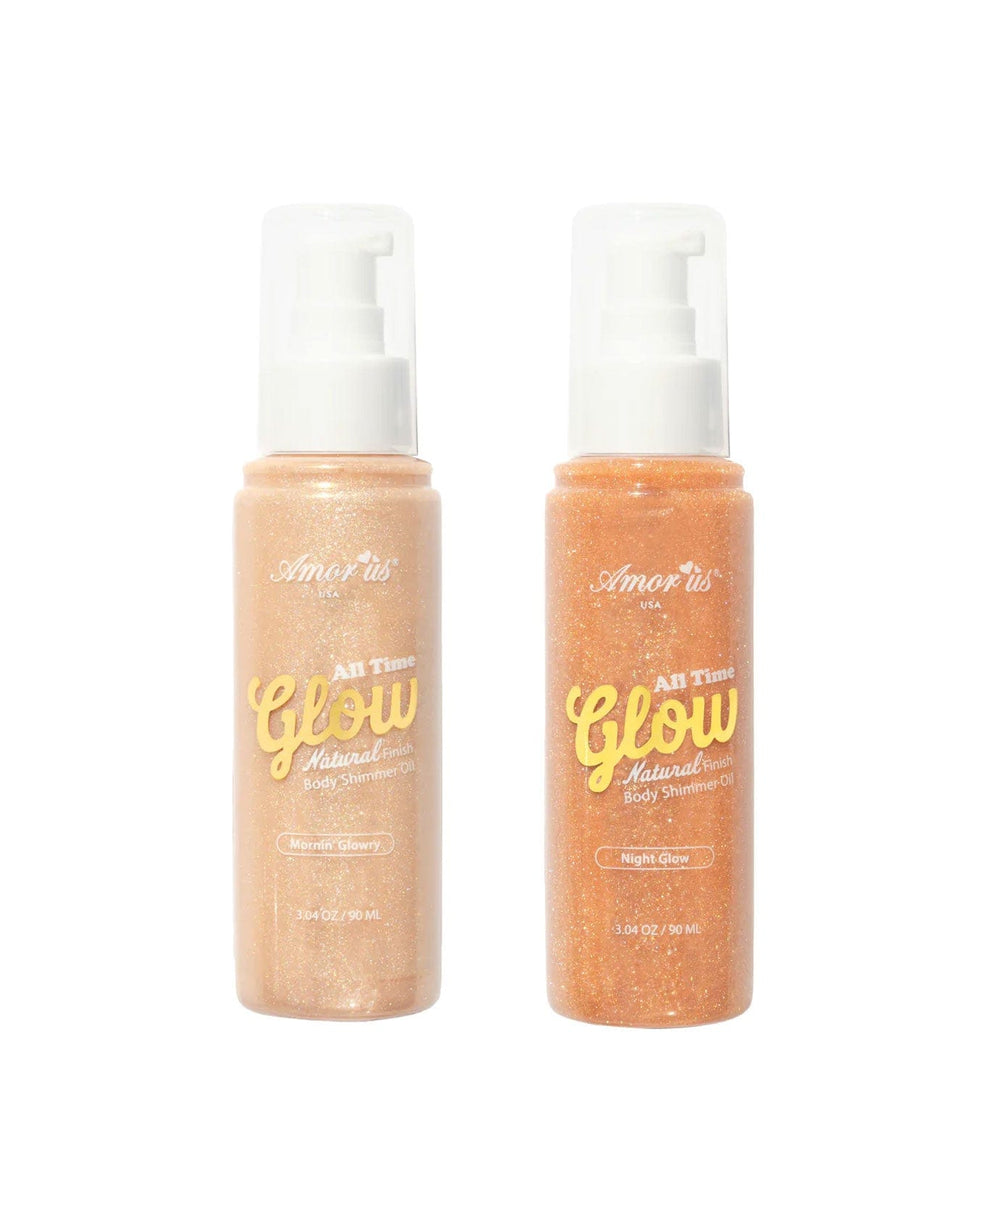 Amor Us all time glow body shimmer